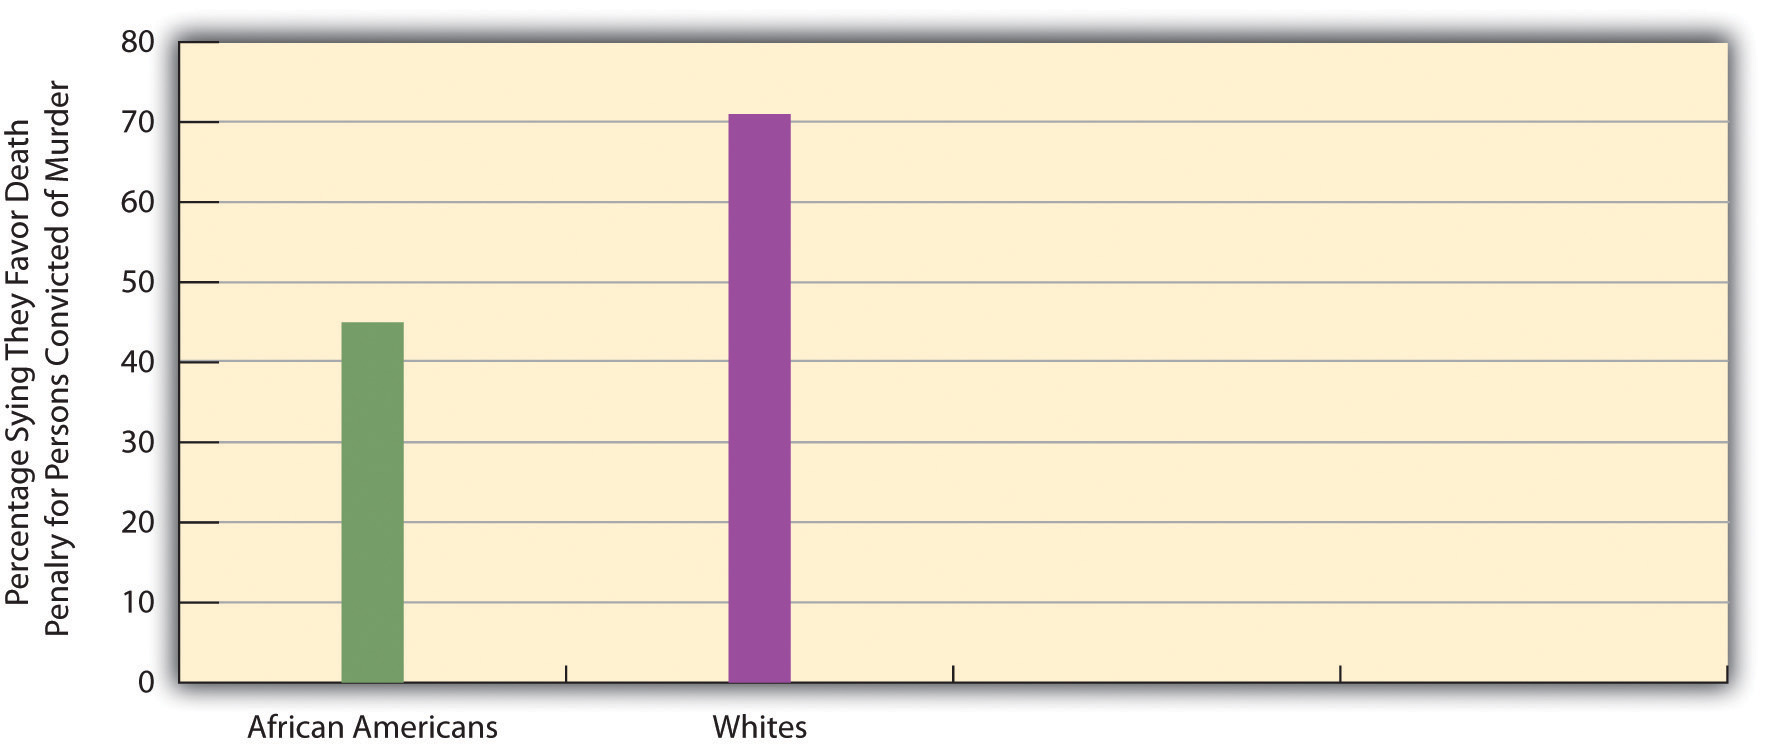 This graph of the race and support for the death penalty shows that whites are much more for it than African Americans